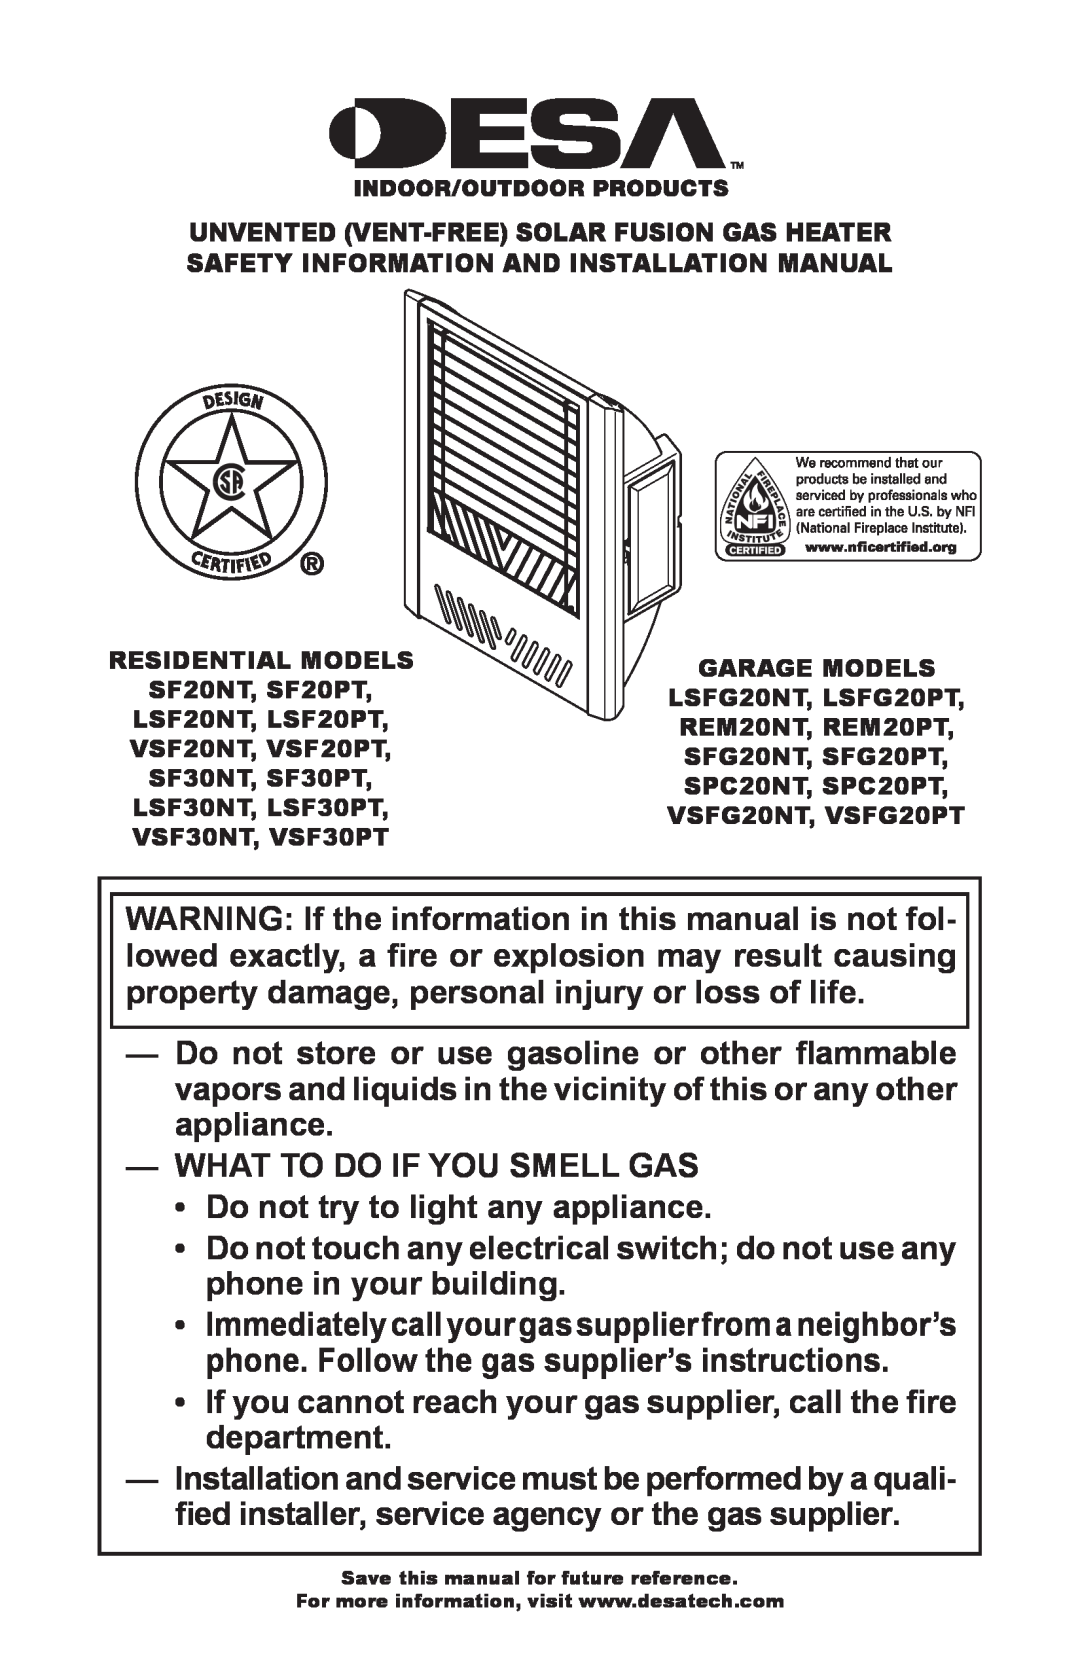 Desa SF20NT installation manual What To Do If You Smell Gas 